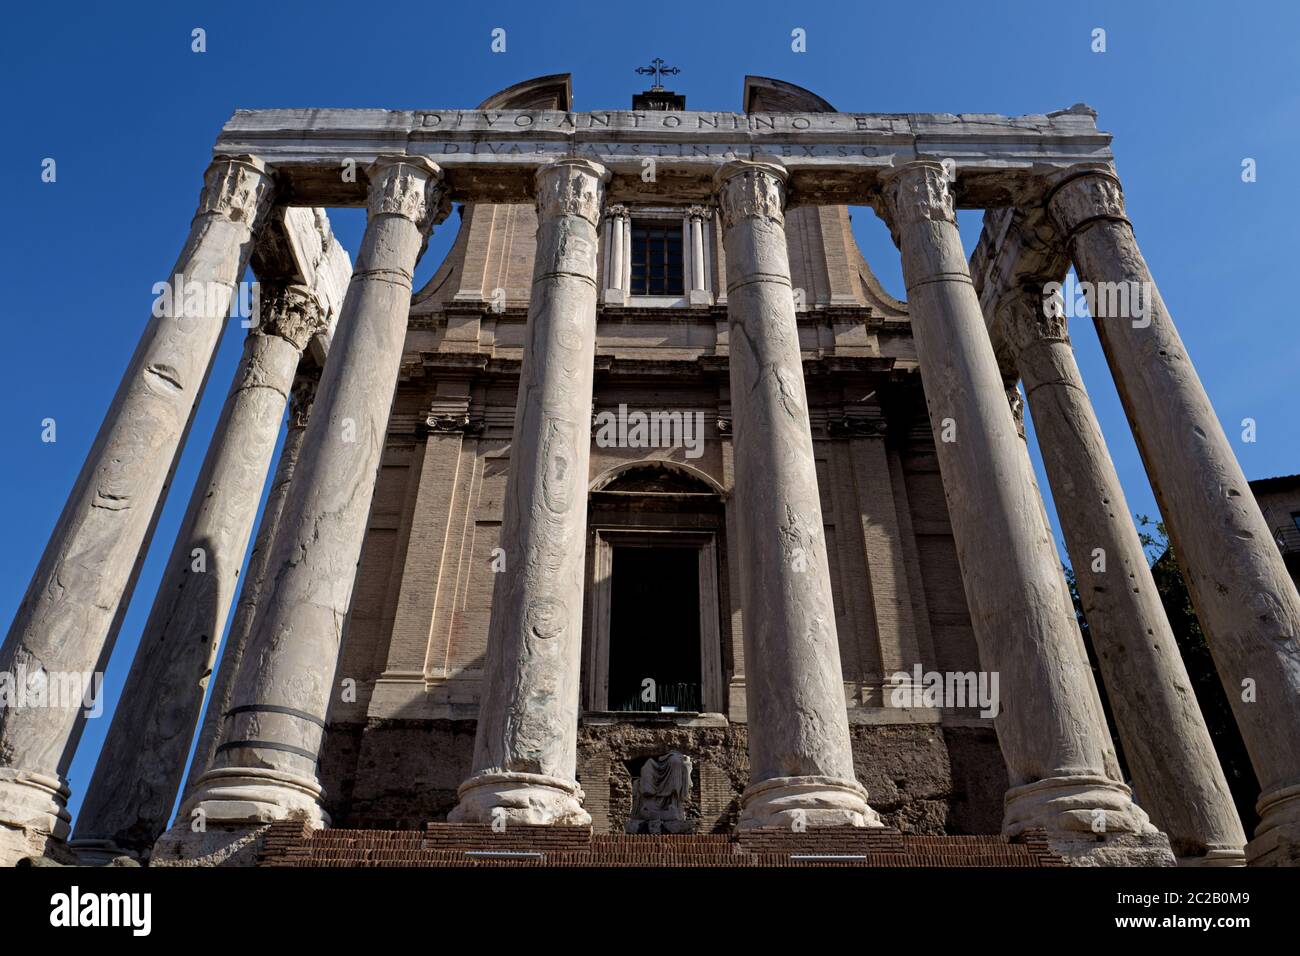 Roman forum archeological site, in Rome, Italy Stock Photo